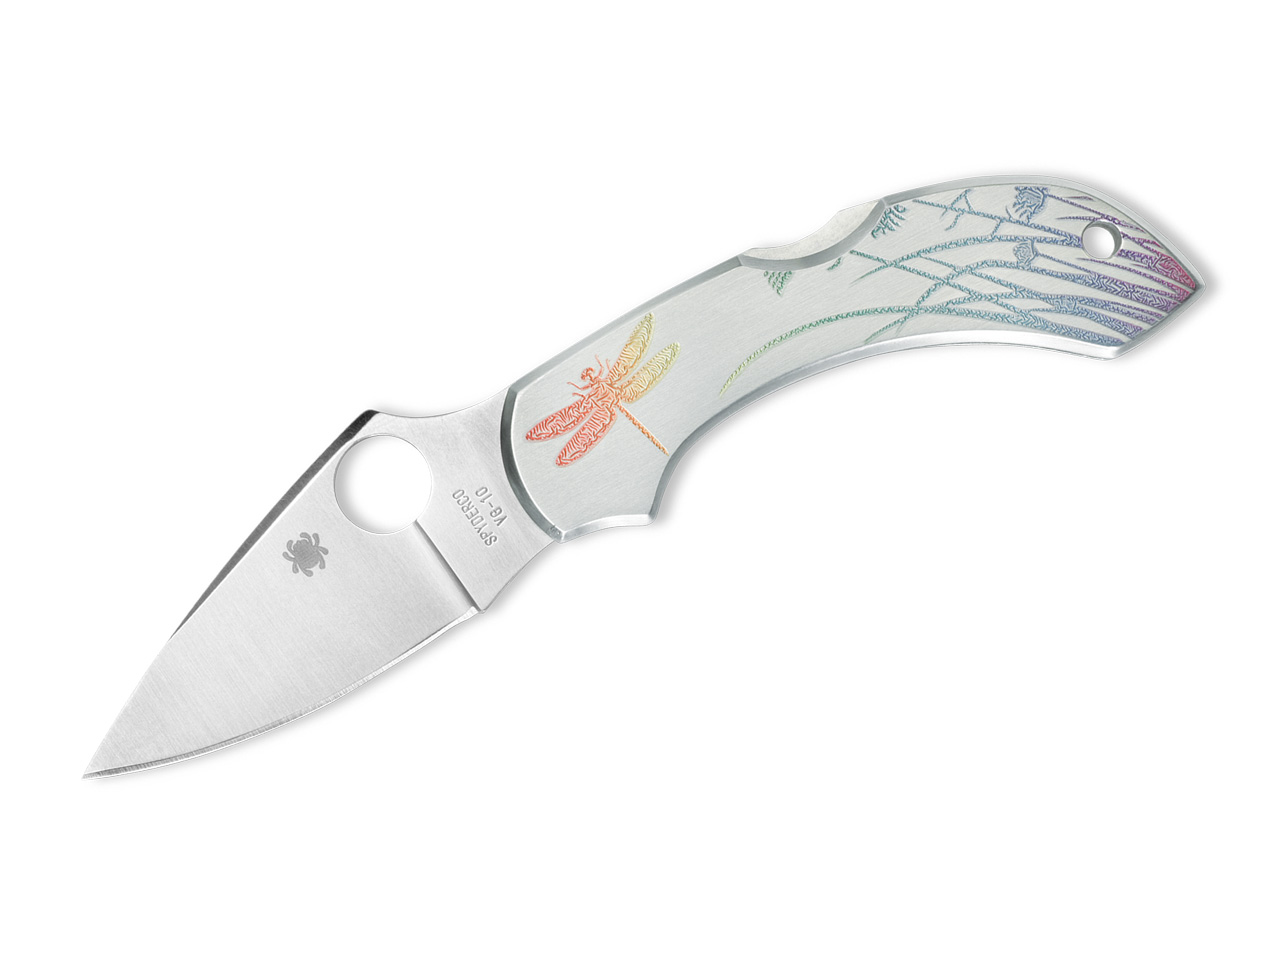 Spyderco Dragonfly Stainless Steel Tattoo